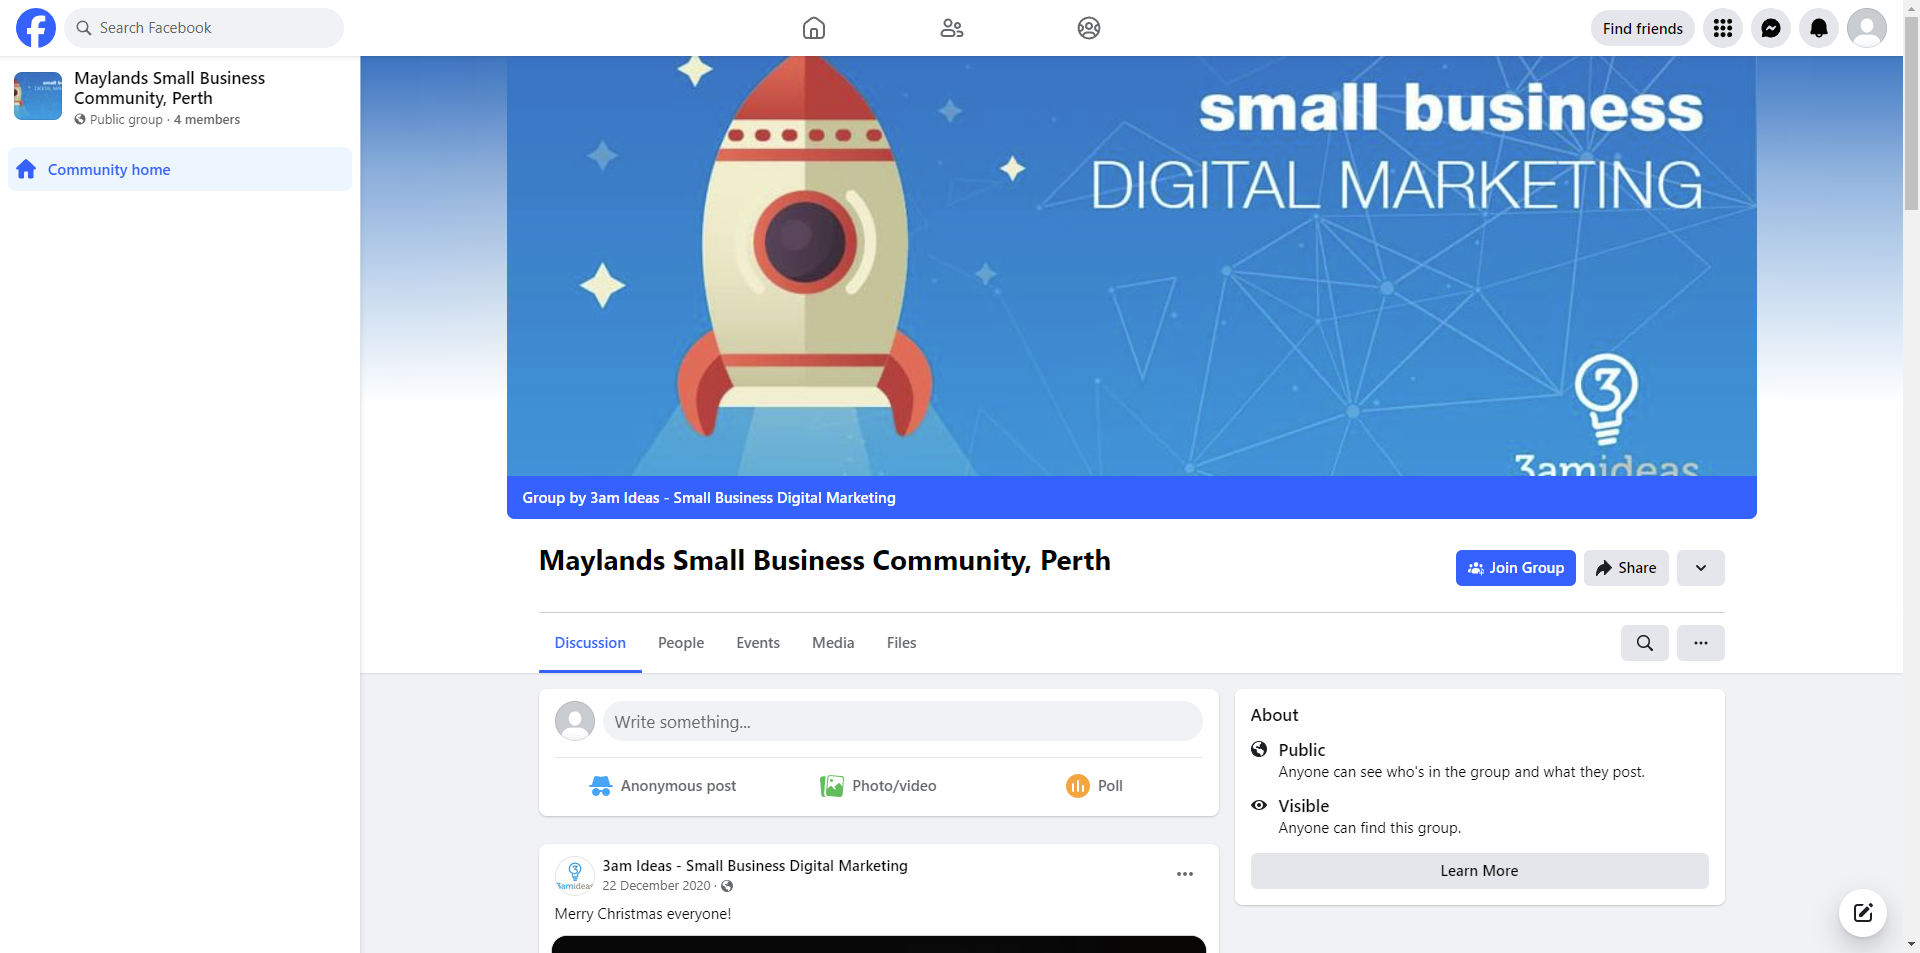 Maylands Small Business Community, Perth